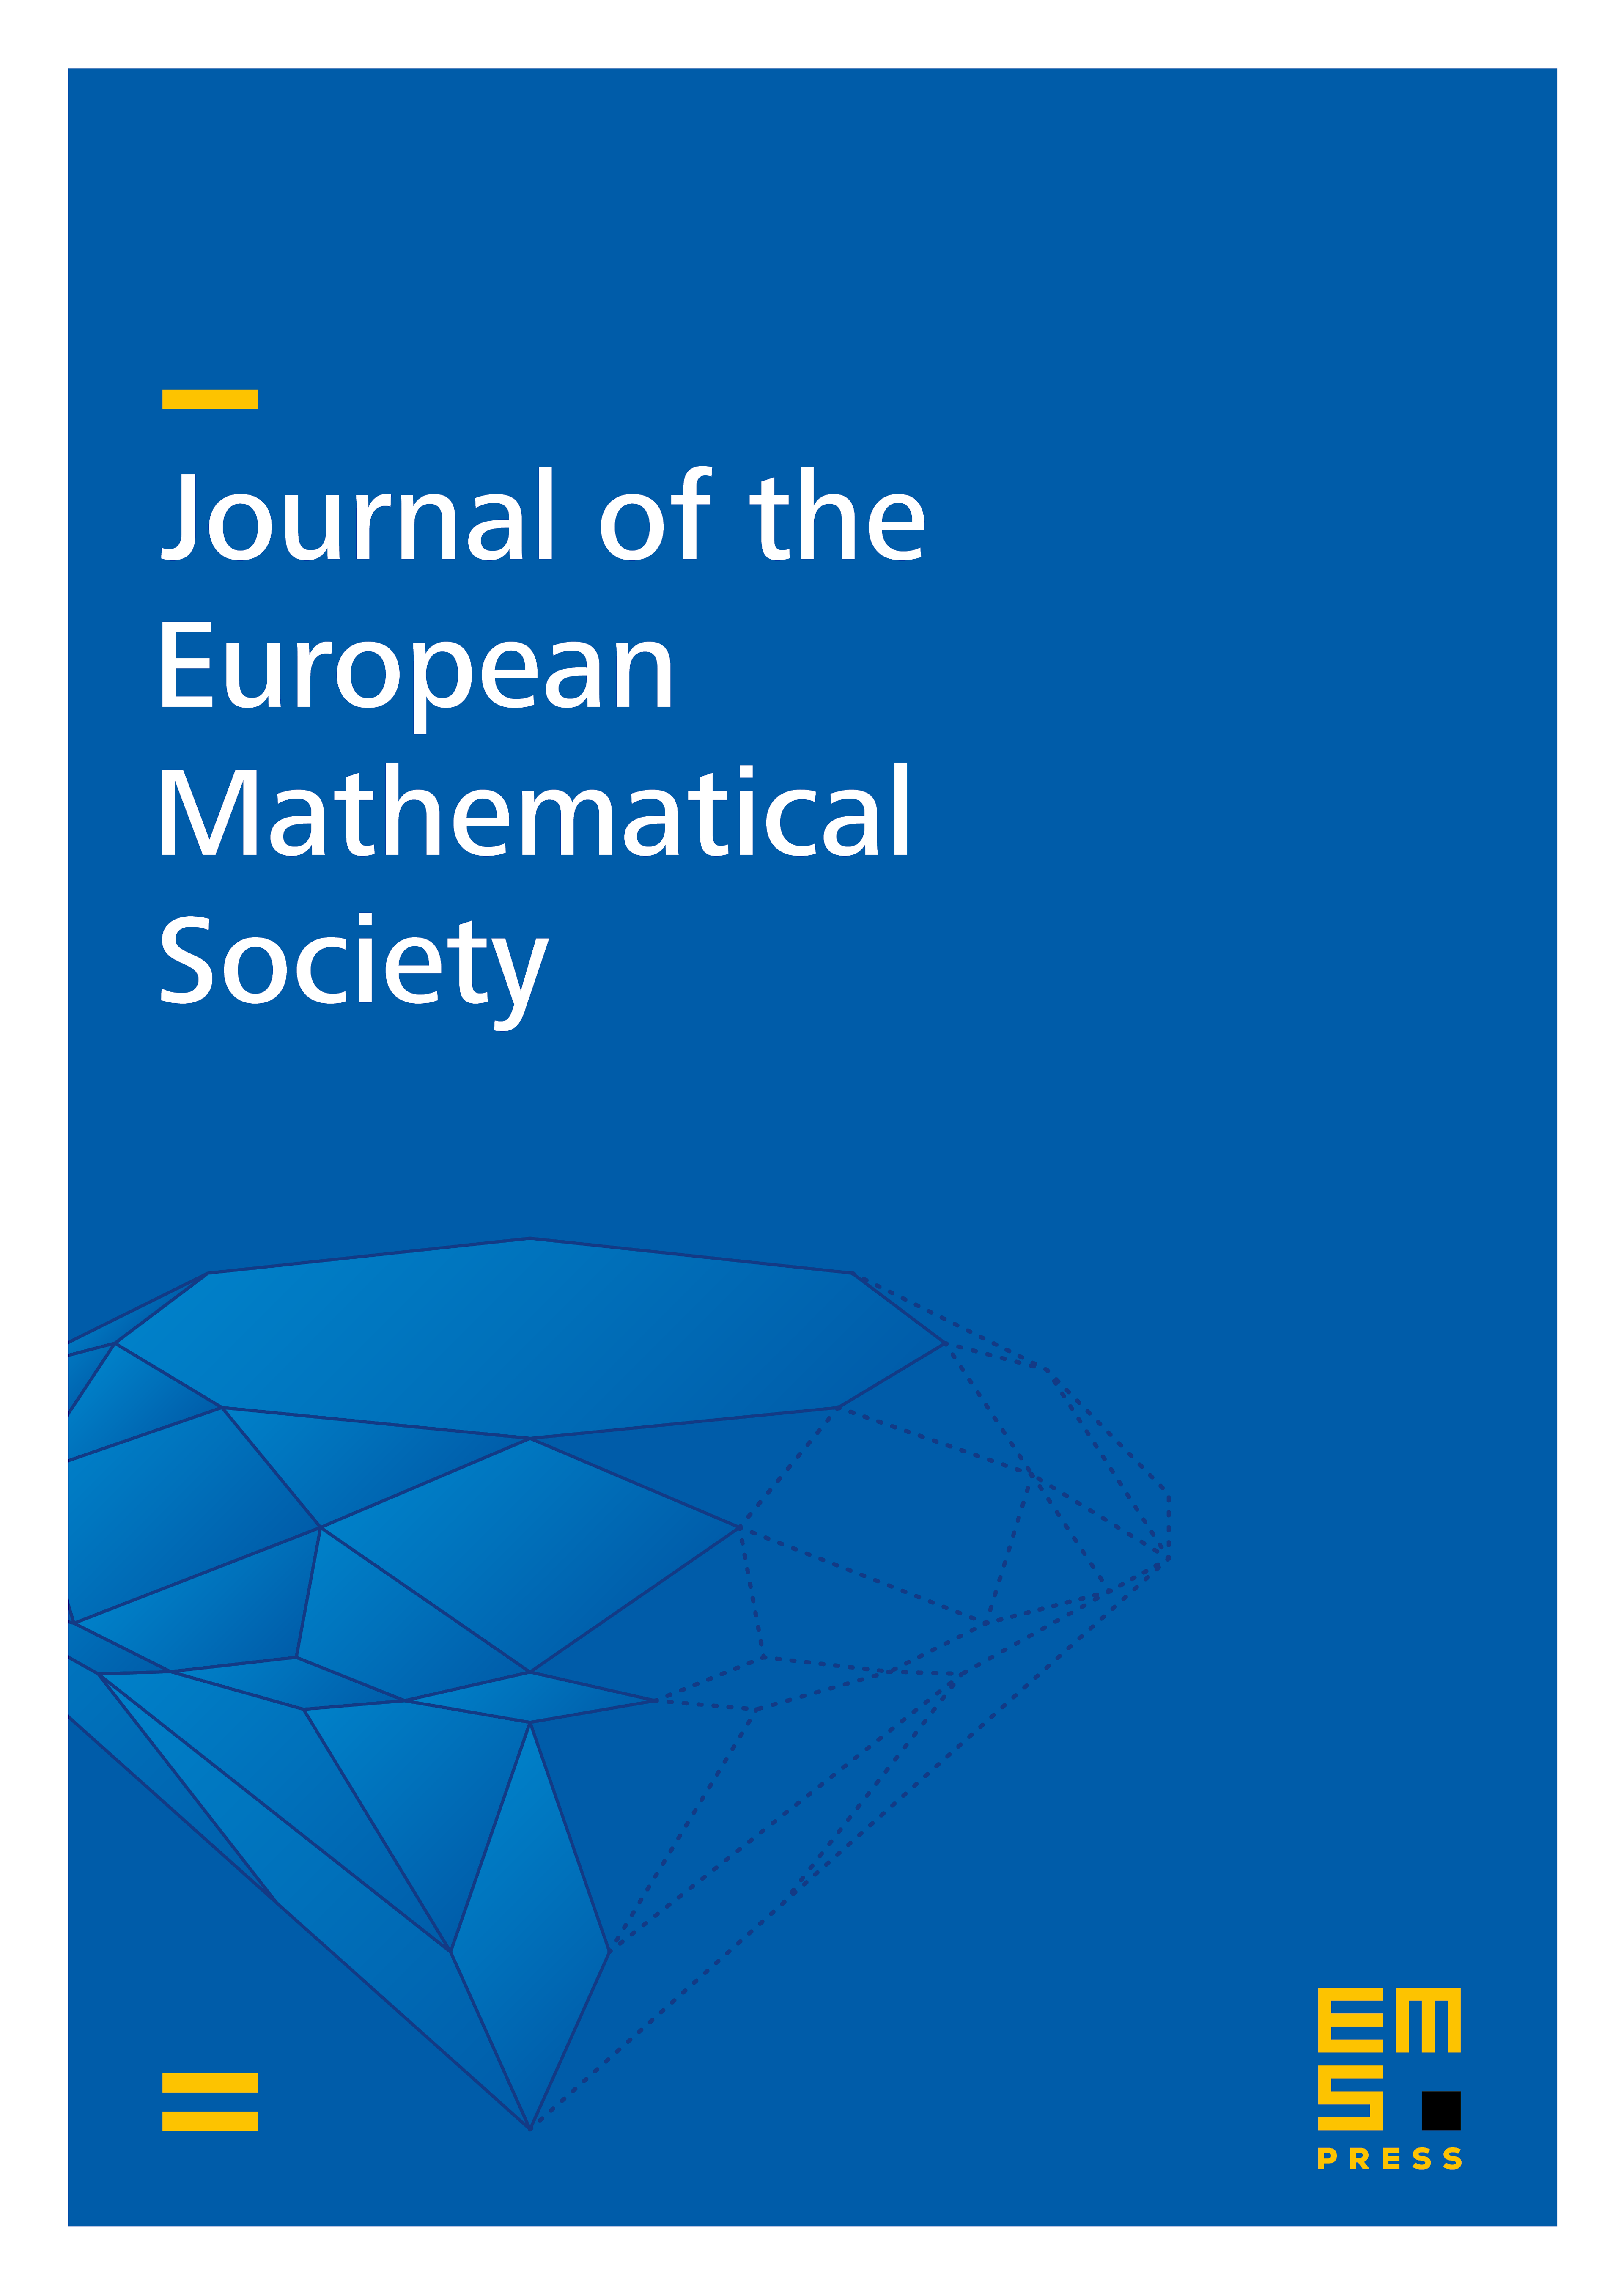 Parapuzzle of the multibrot set and typical dynamics of unimodal maps cover